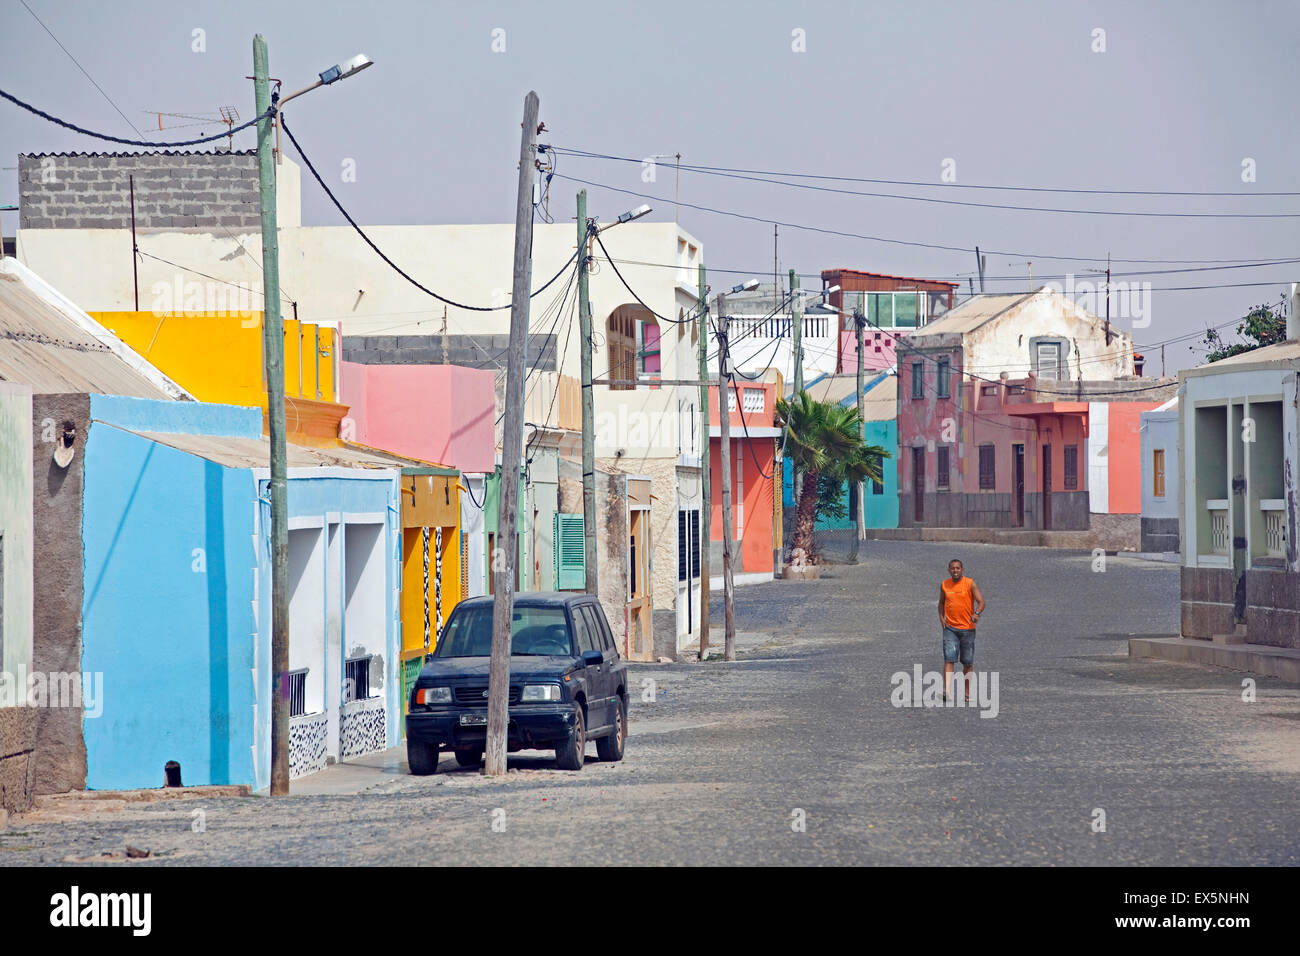 Street with colourful houses in the village Rabil on the island Boa Vista, Cape Verde / Cabo Verde, Western Africa Stock Photo